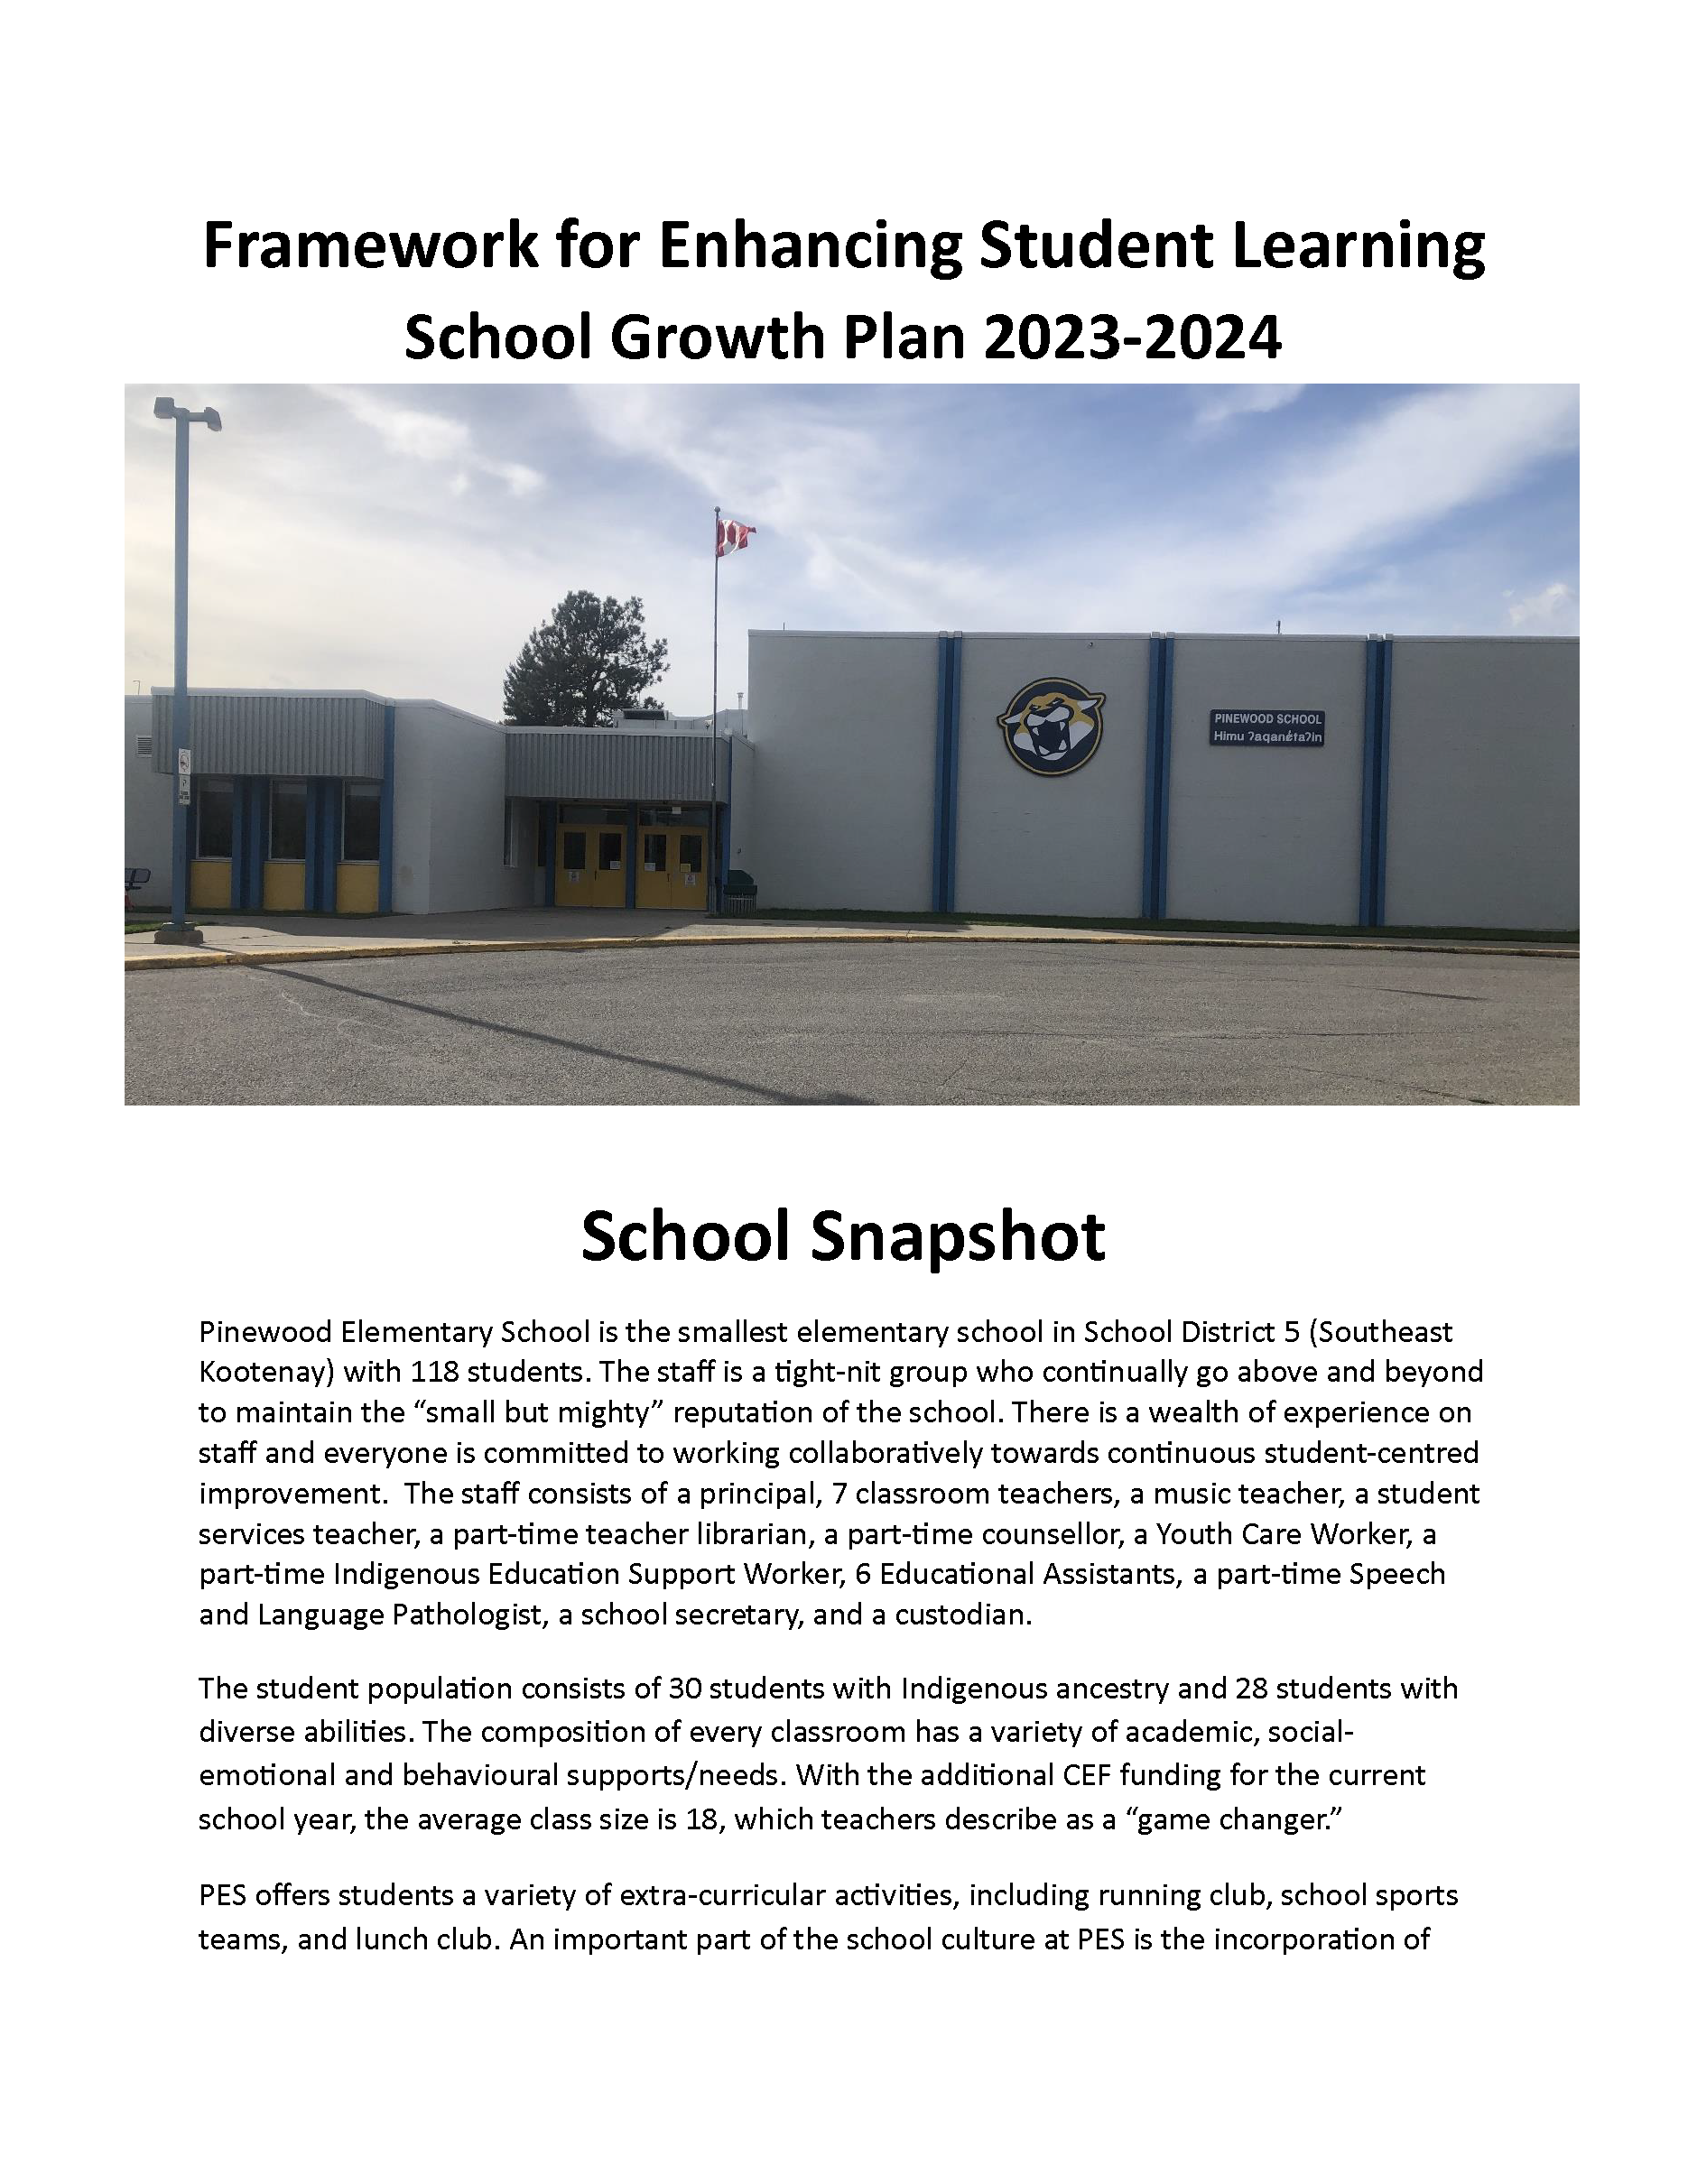 2023-2024 PES School Growth Plan_Page_1.png